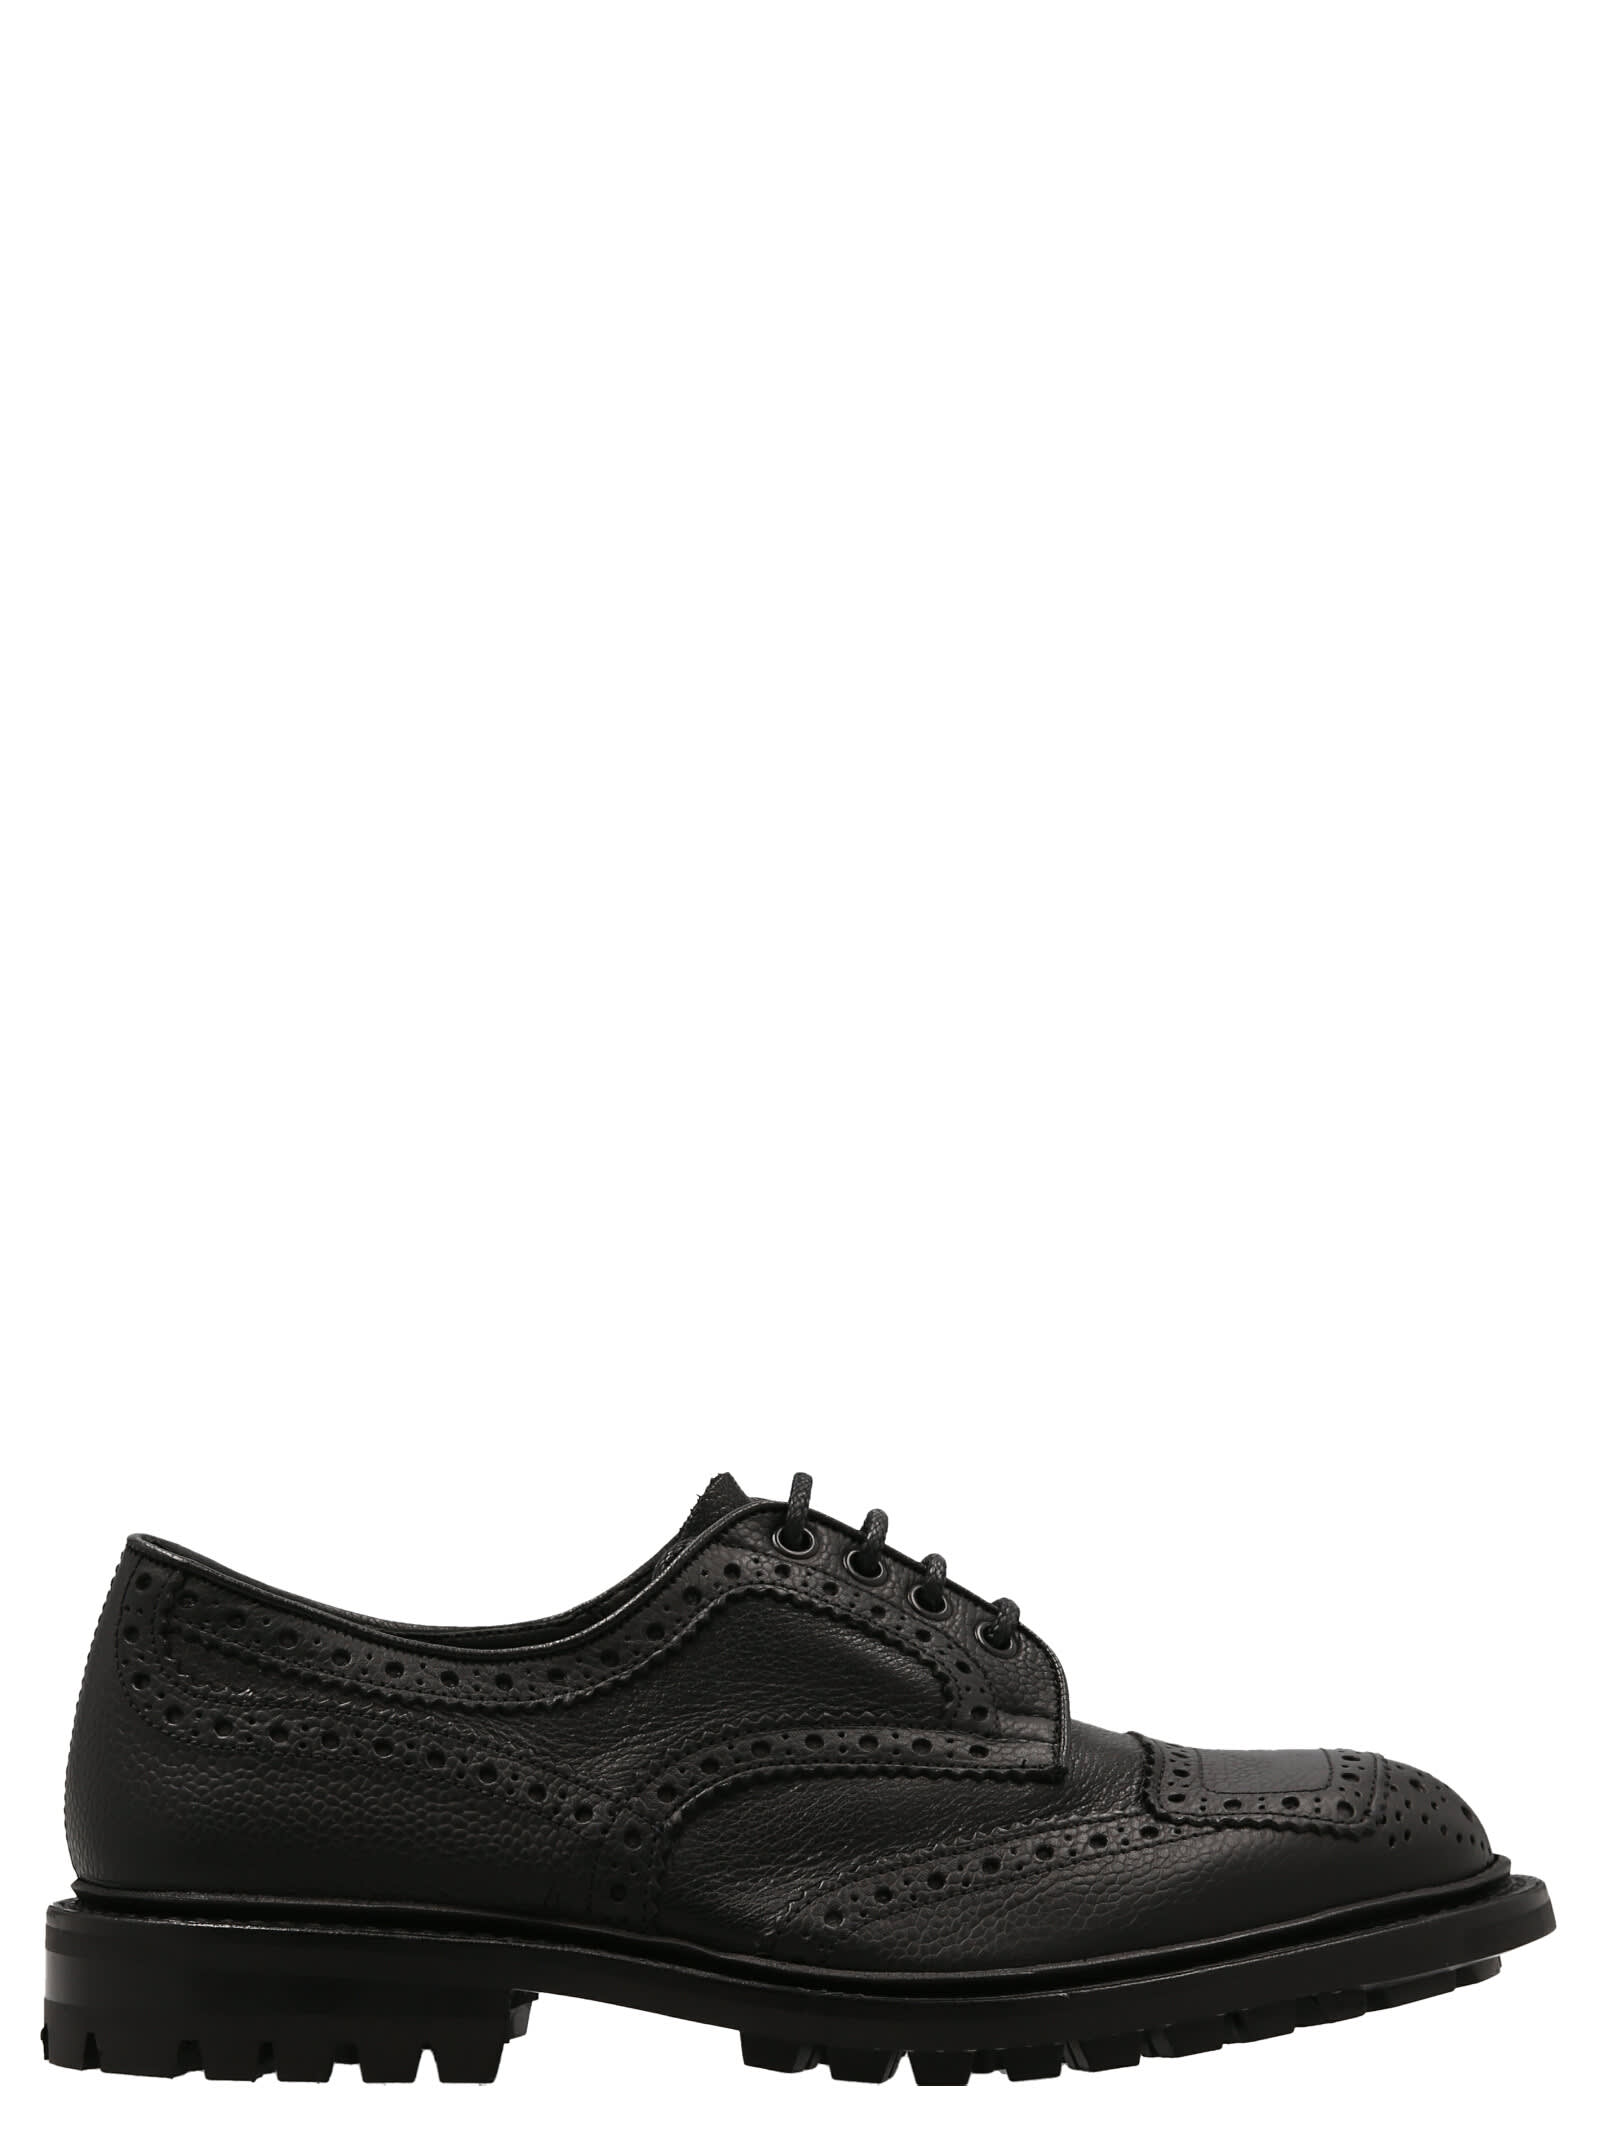 Tricker's francis Lace Ups